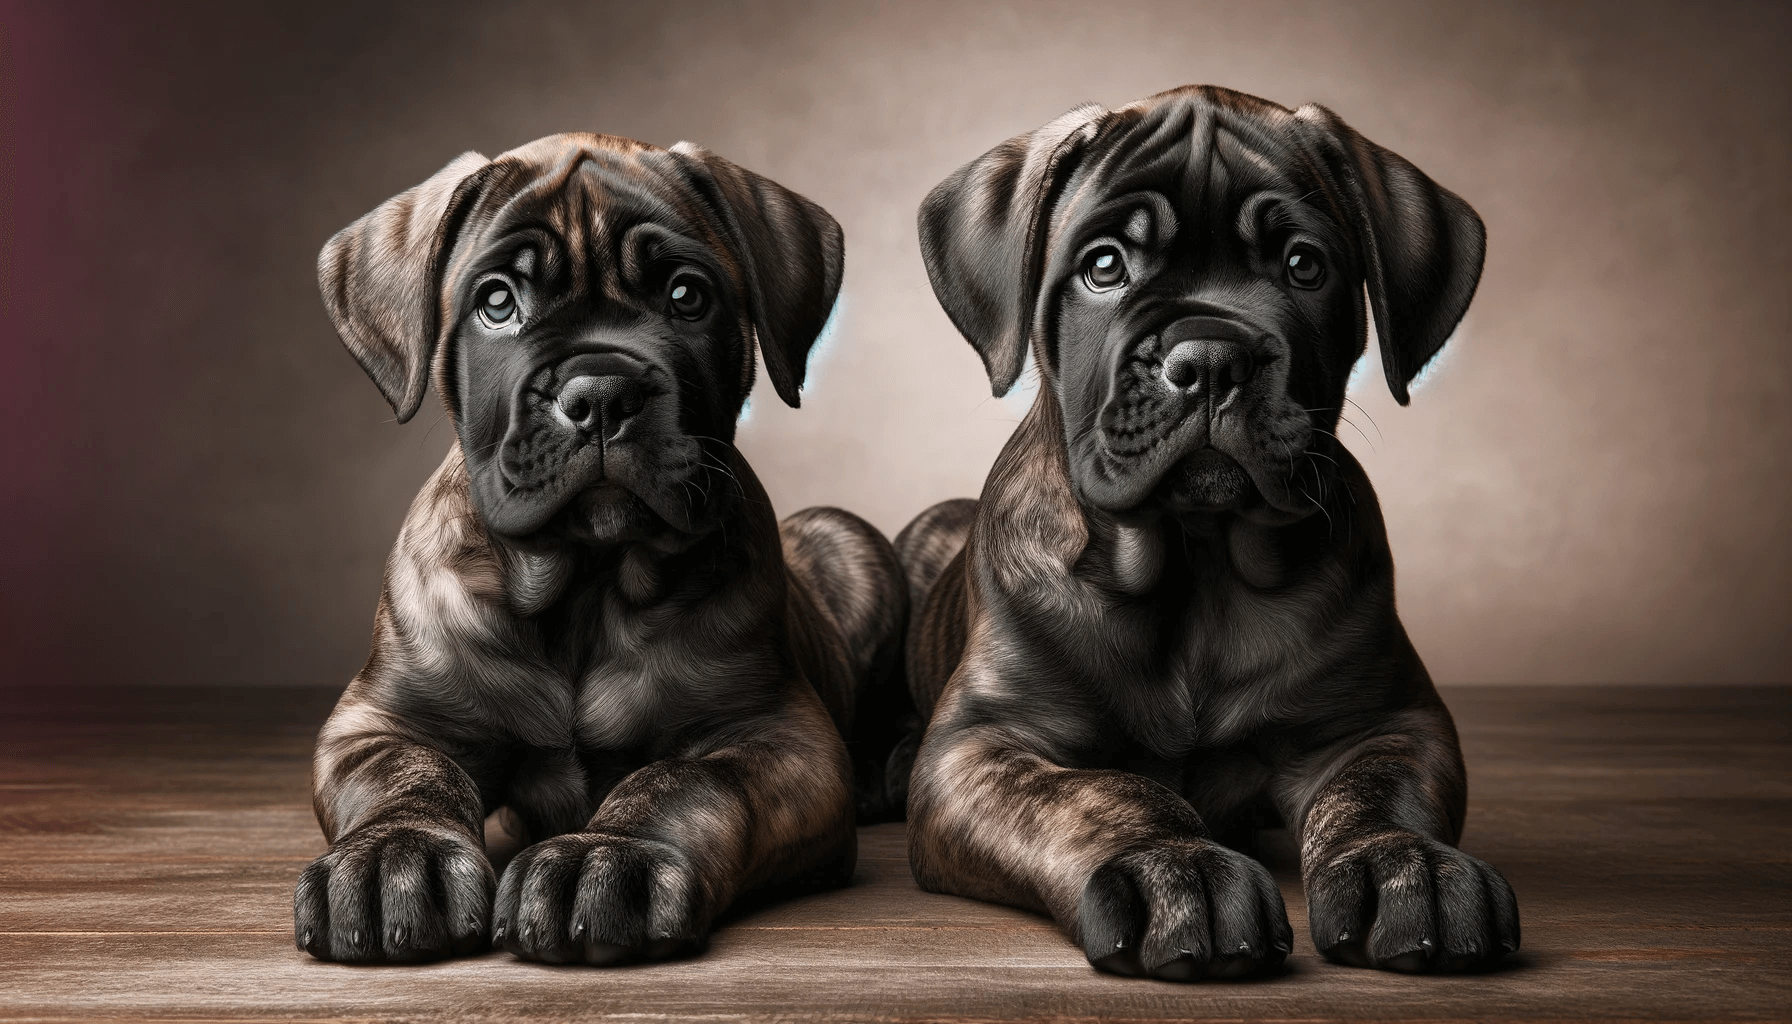 Two brindle Cane Corso puppies lying side by side, showing curiosity and alertness, highlighting their bond and playful nature.